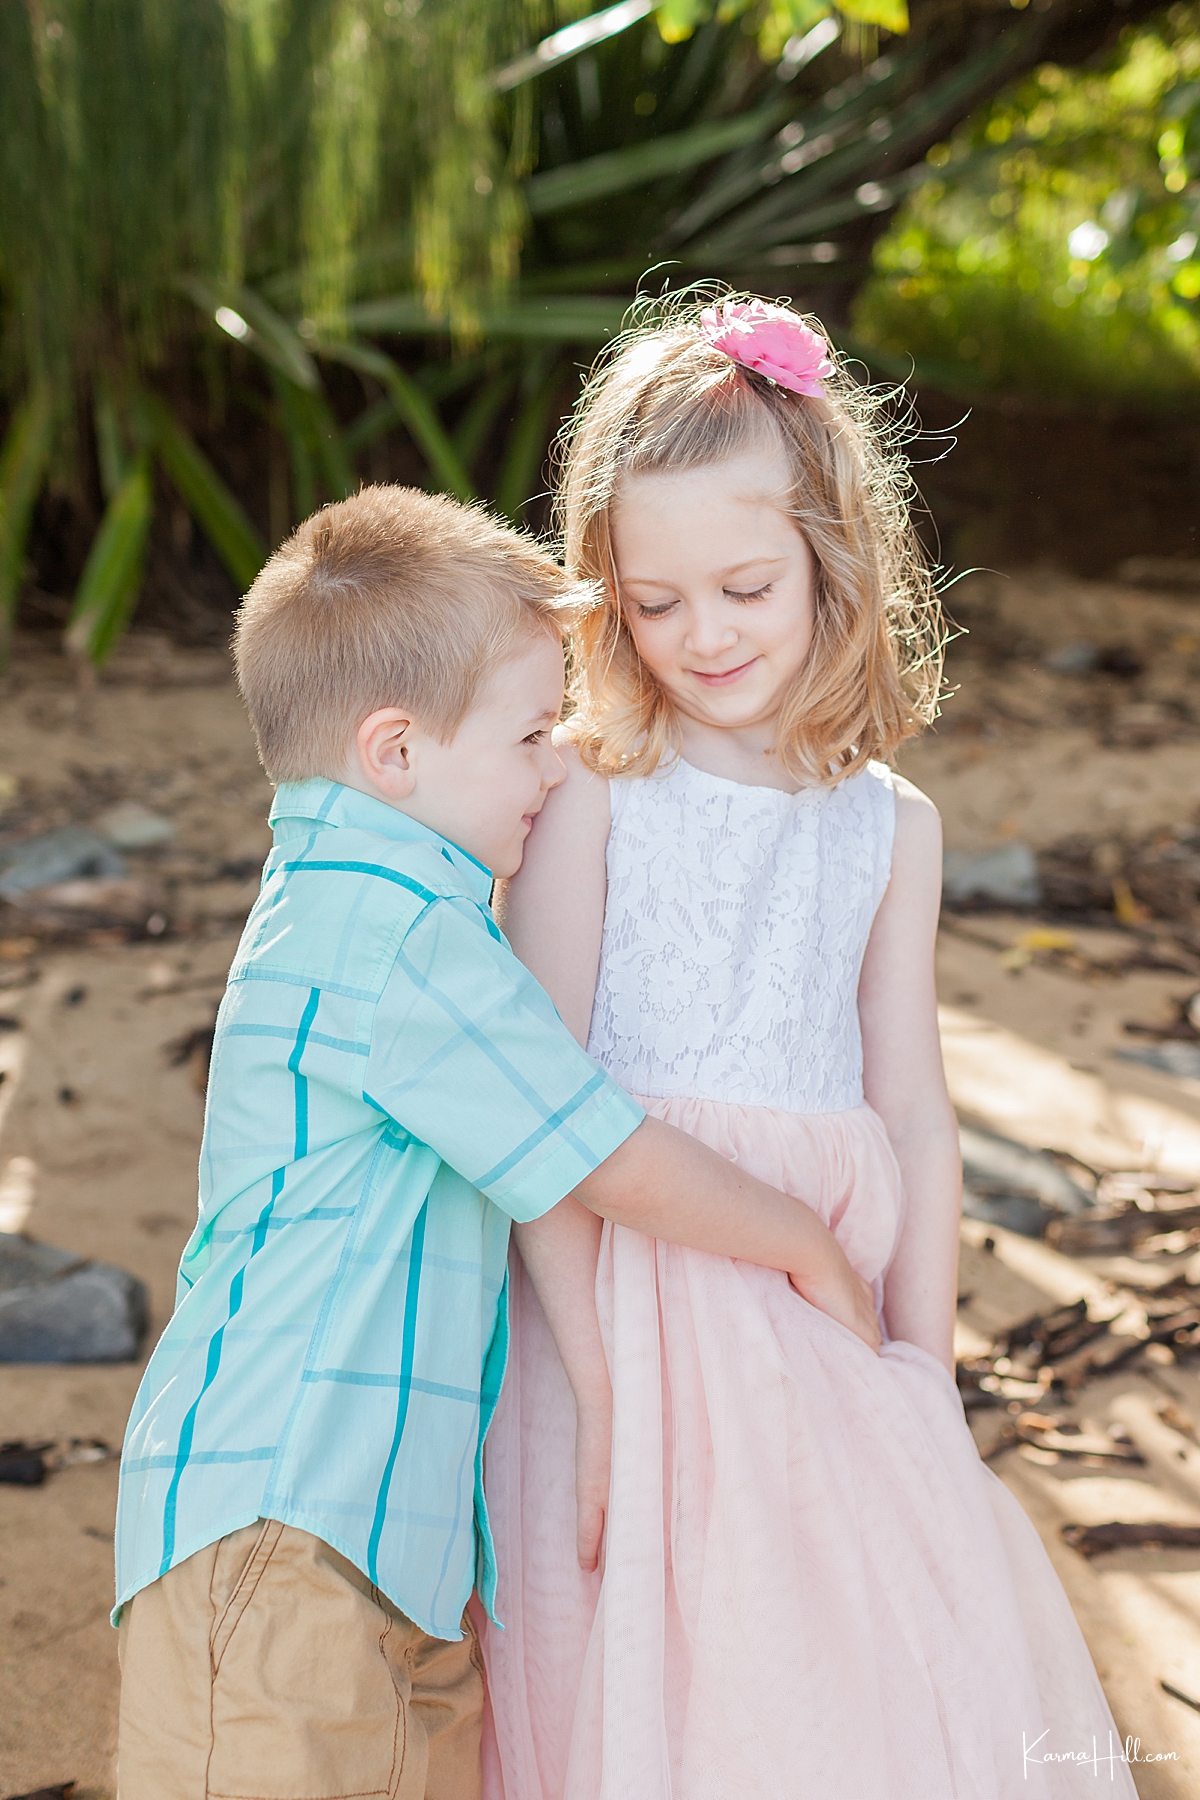 little brother hugs his older sister as she smiles down at him. Brother wears a blue collared shirt and sister is in a lace flower dress with coral tulle